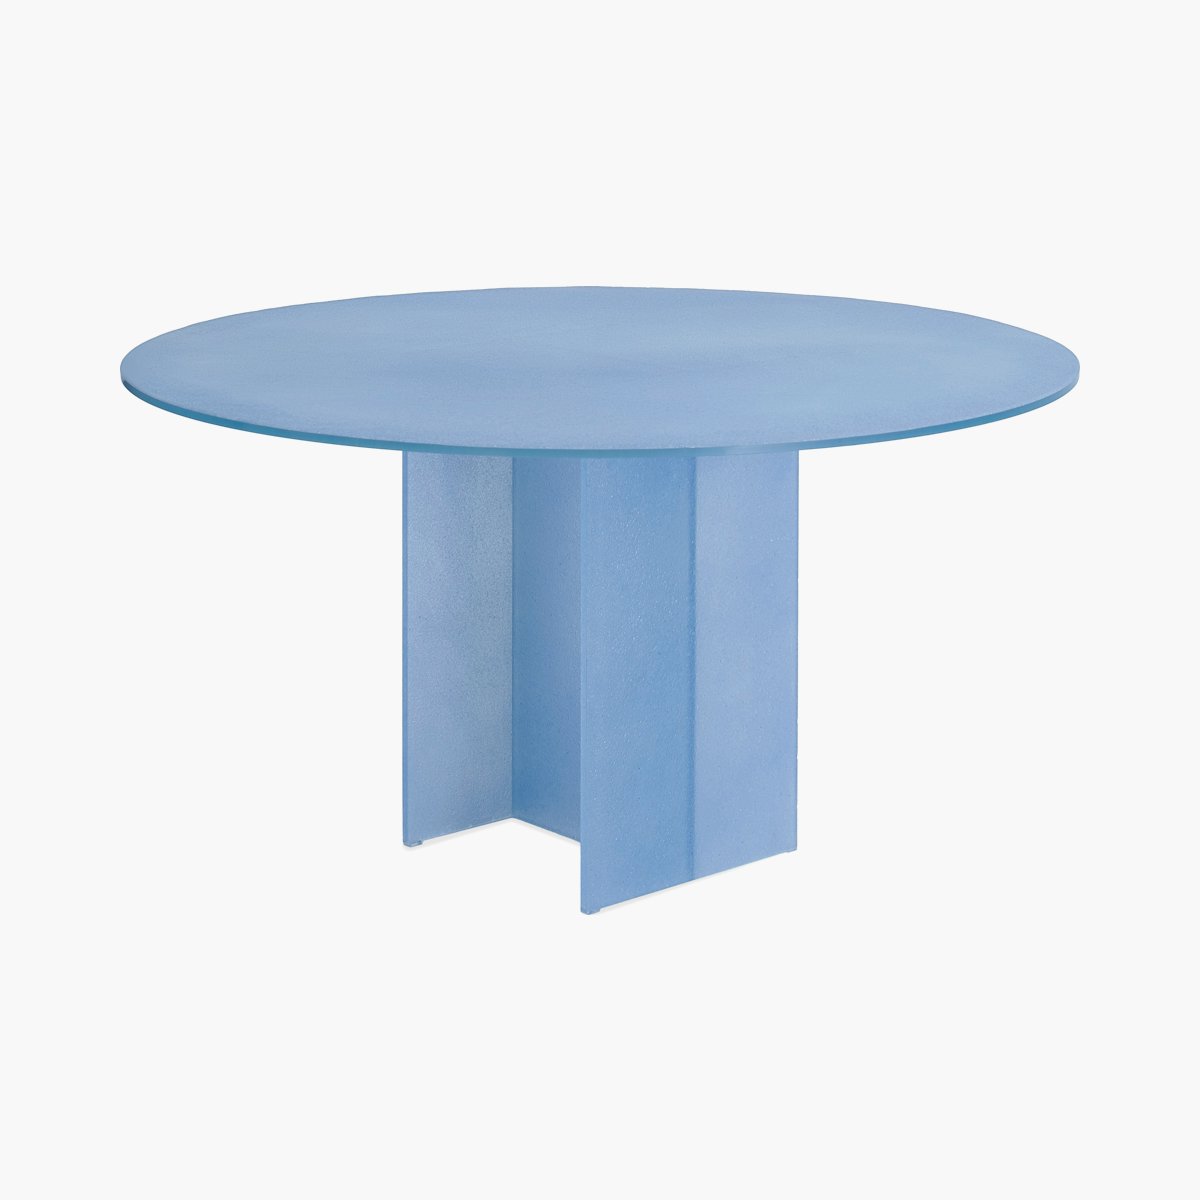 Simoon Round Glass Dining Table